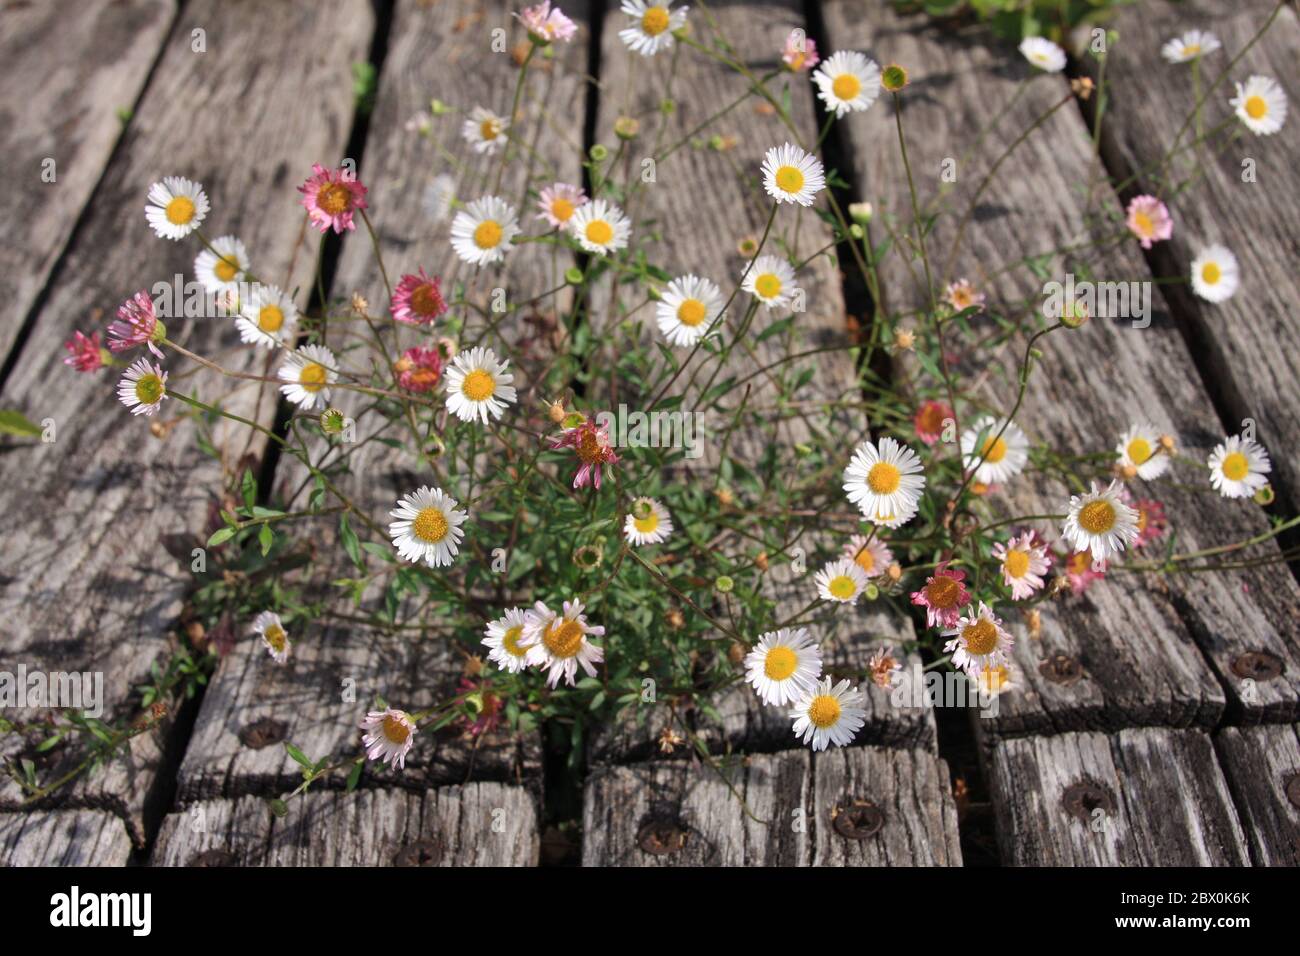 Close up of dainty white and pink Spanish daisy, Erigeron karvinskianus between weathered wooden slats selective focus. Romantic country garden Stock Photo